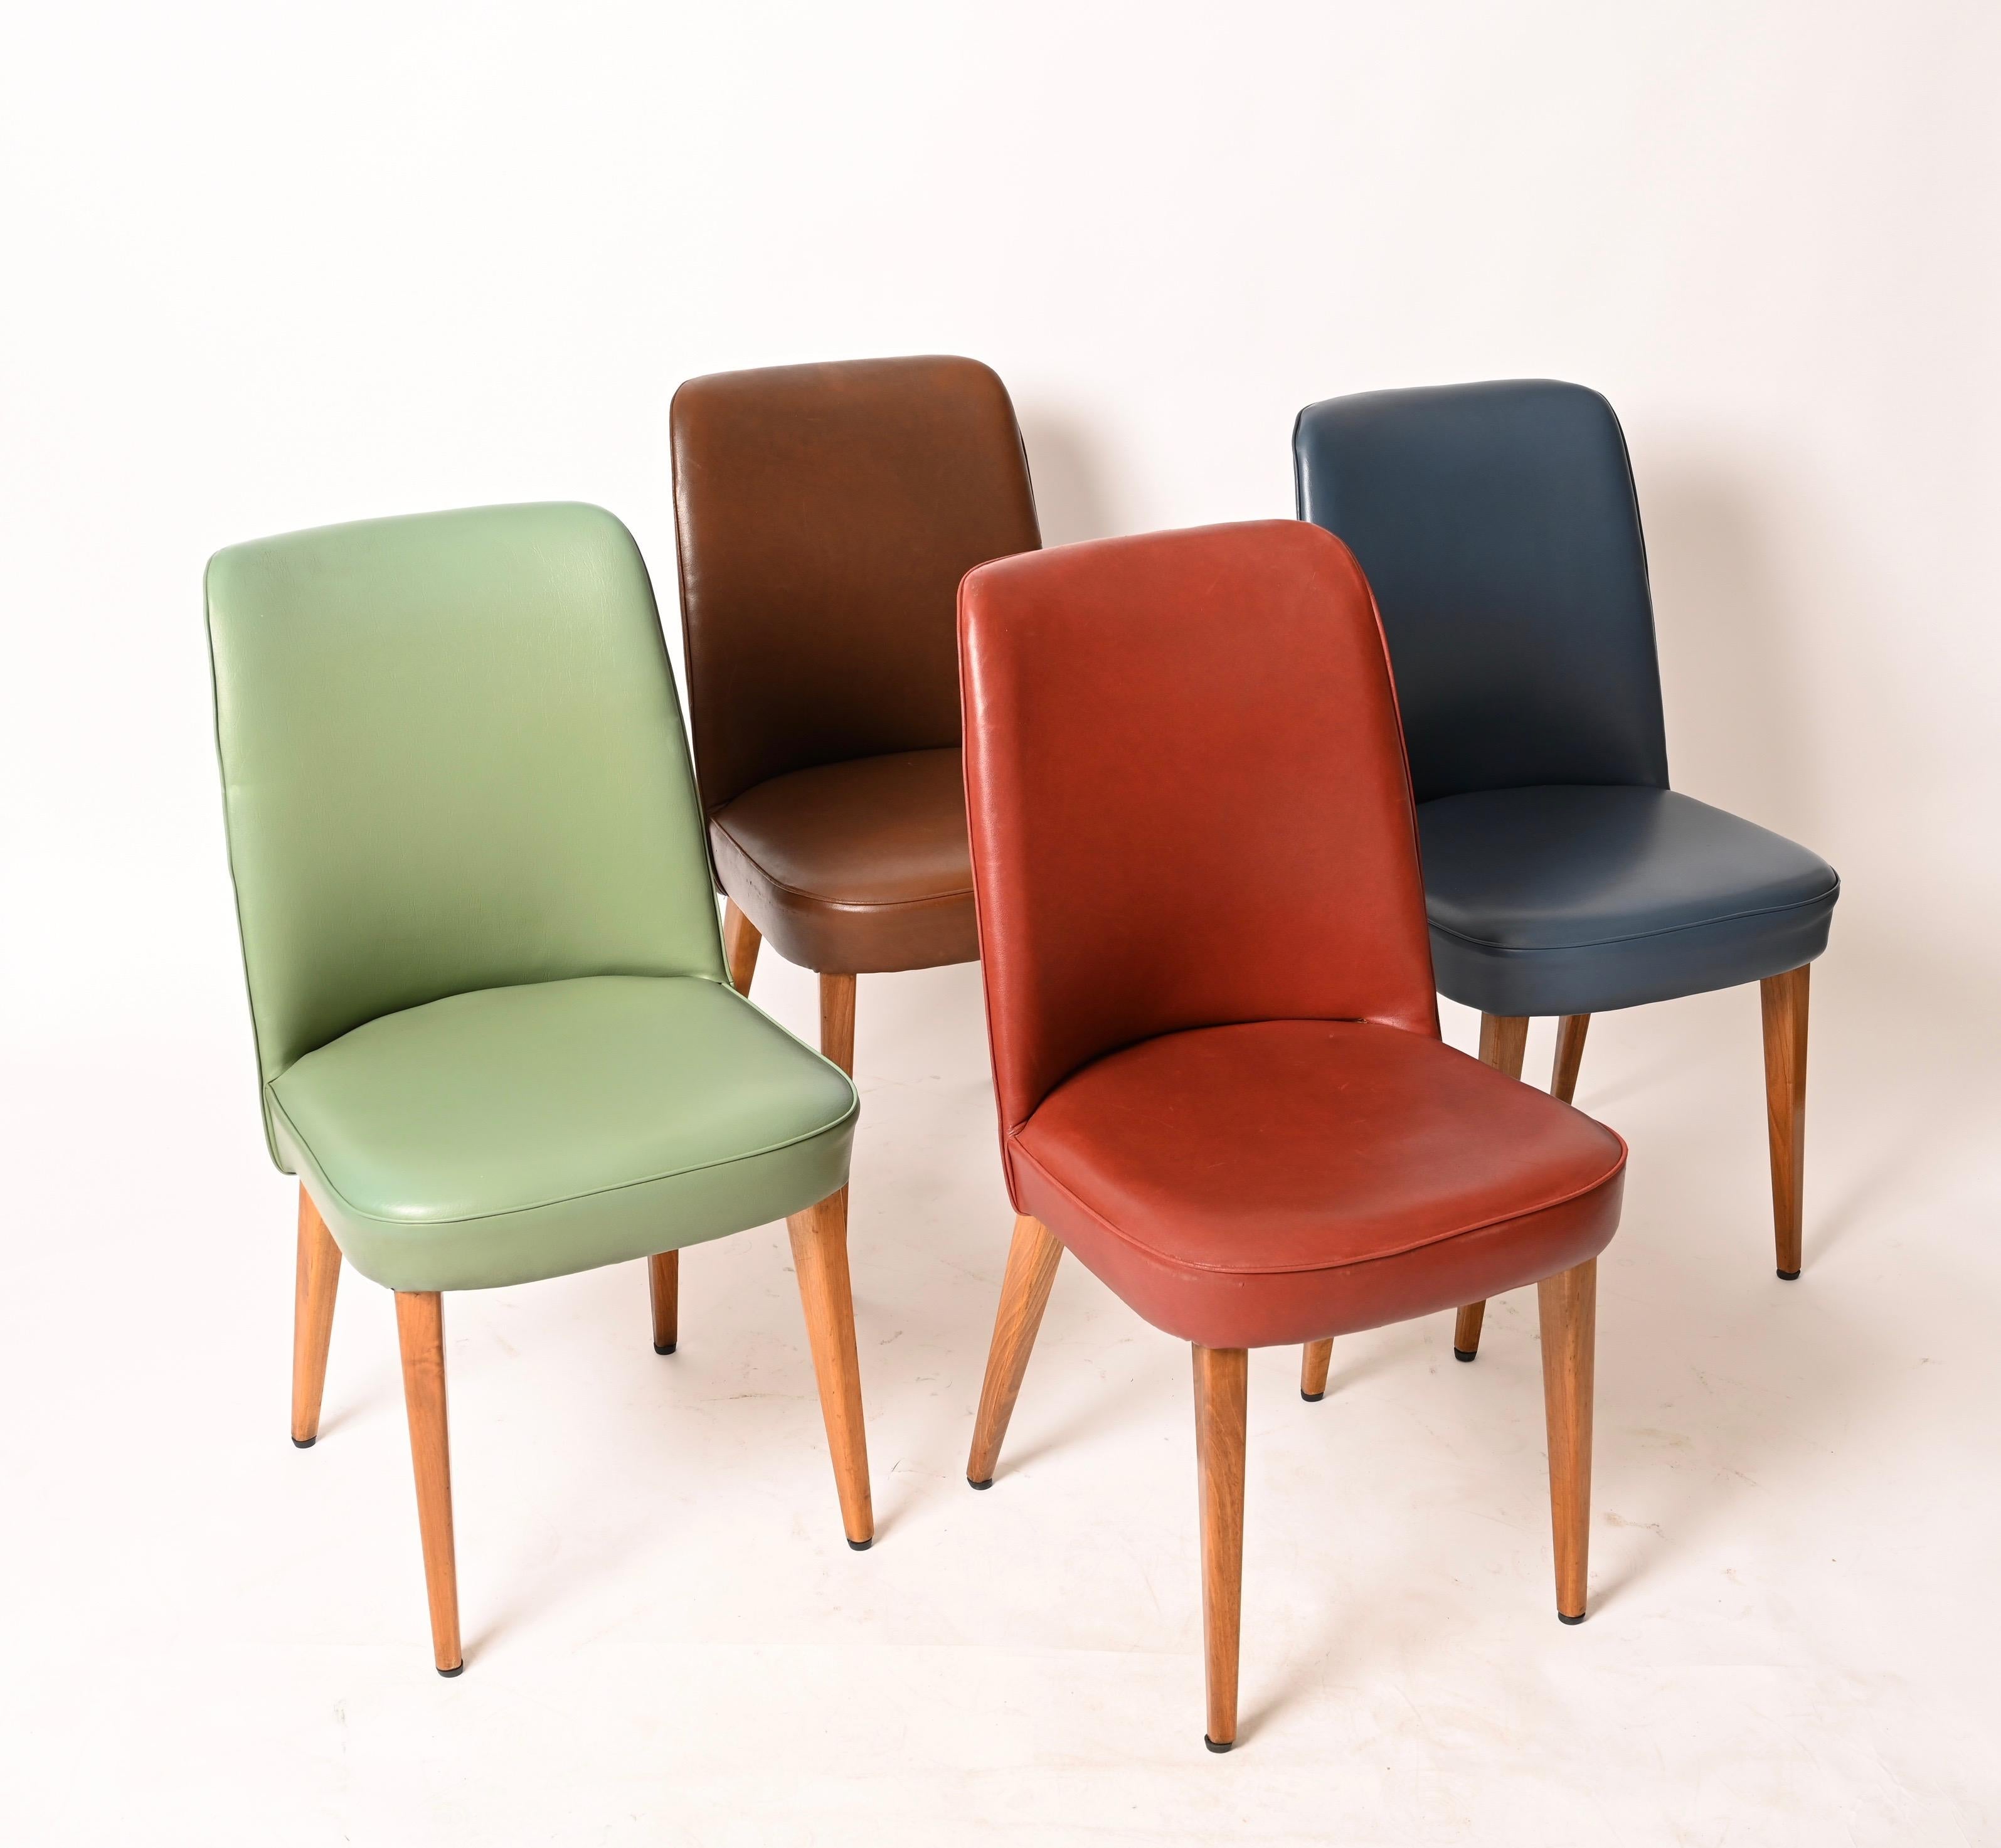 Four Colored Leather Chairs from the 1950s by Anonima Castelli Italy For Sale 9